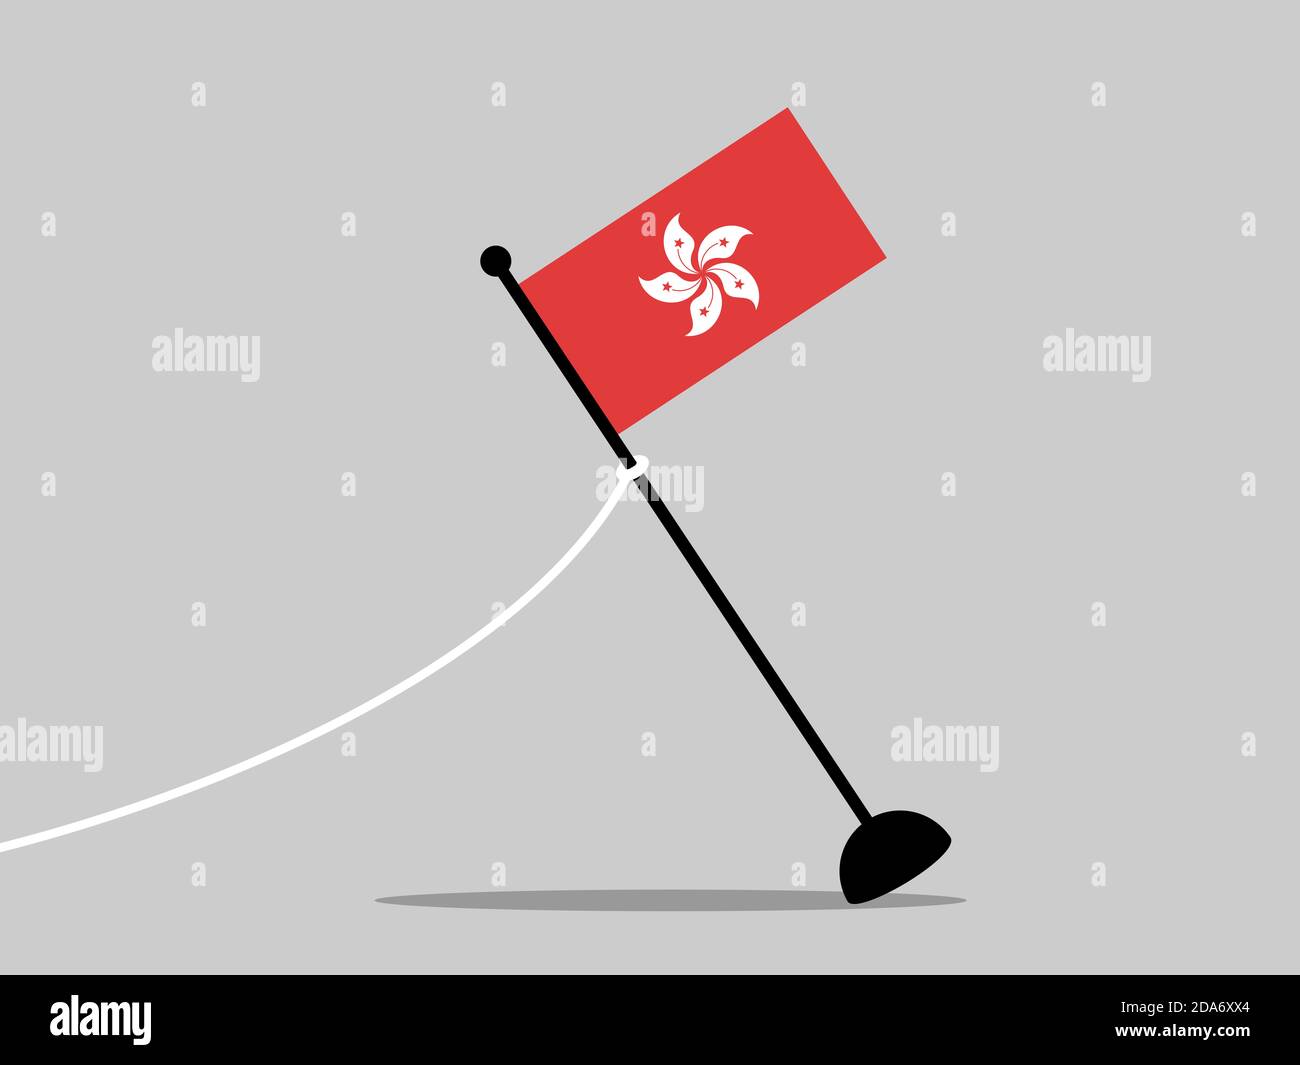 Flag of Hongkong / Hong Kong is removed. End of the country, state and autonomous area. Vector illustration. Stock Photo